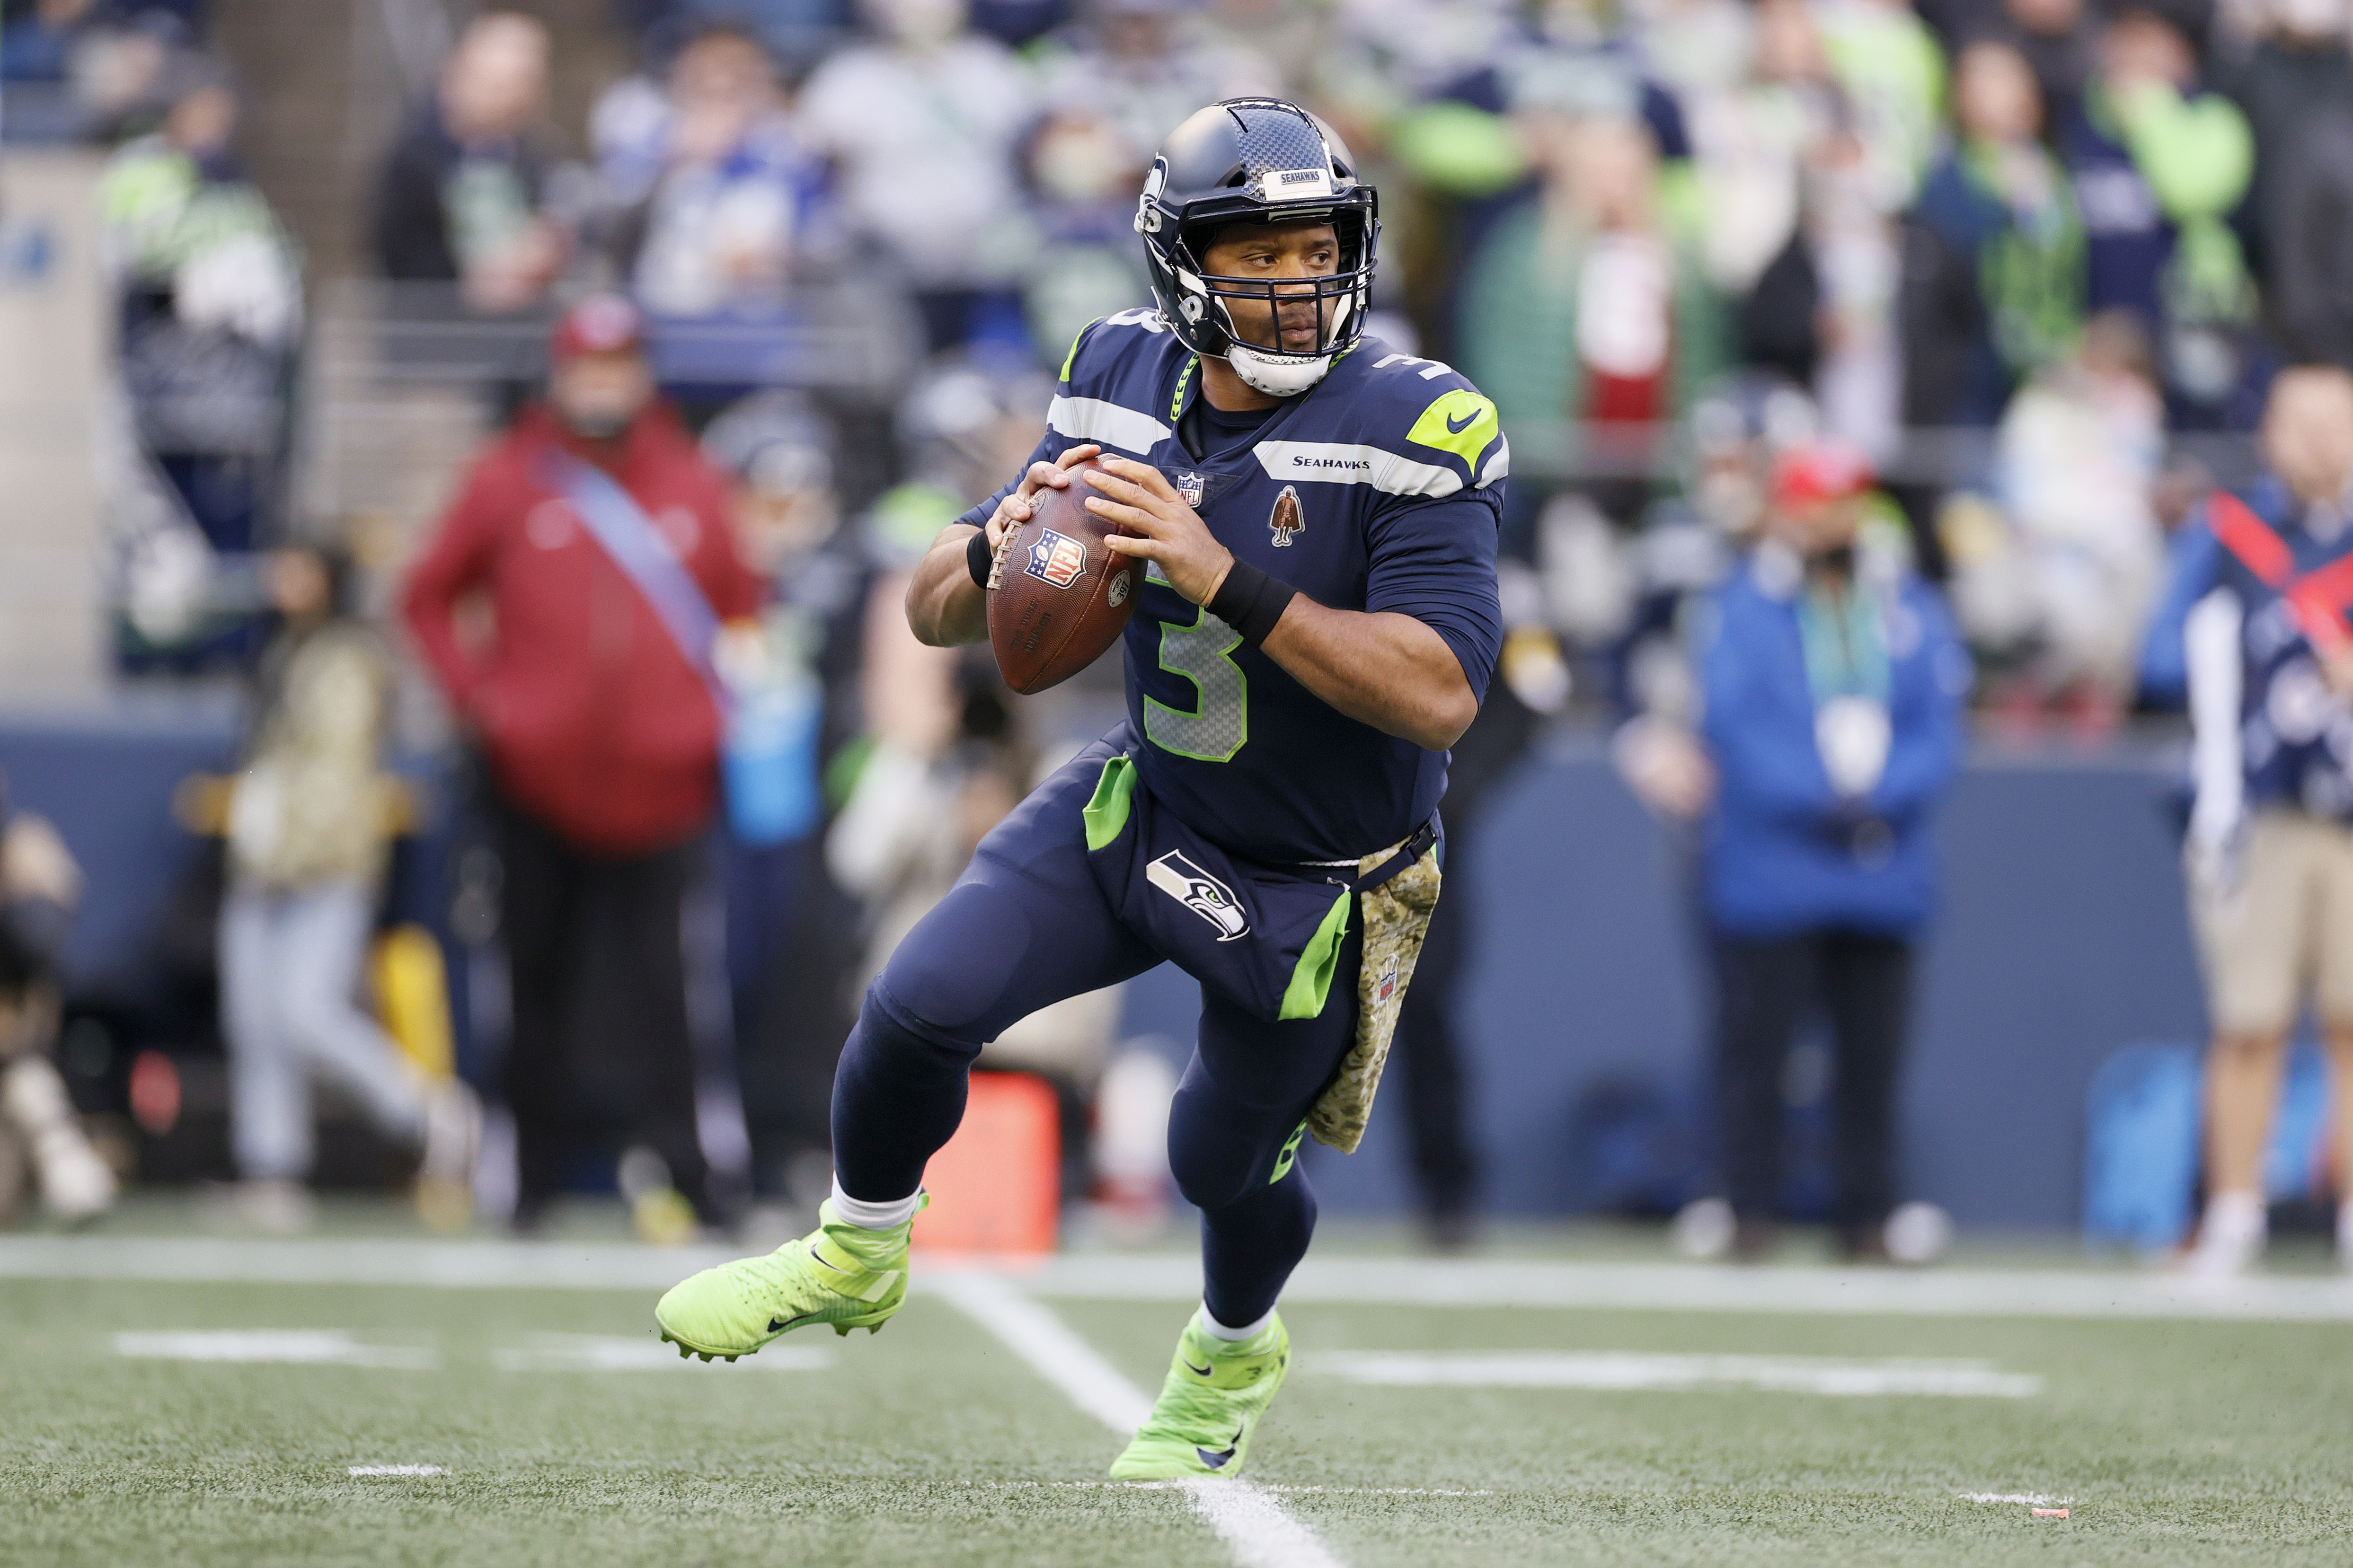 Russell Wilson #3 of the Seattle Seahawks looks to pass against the Arizona Cardinals during the second half at Lumen Field on November 21, 2021 in Seattle, Washington.